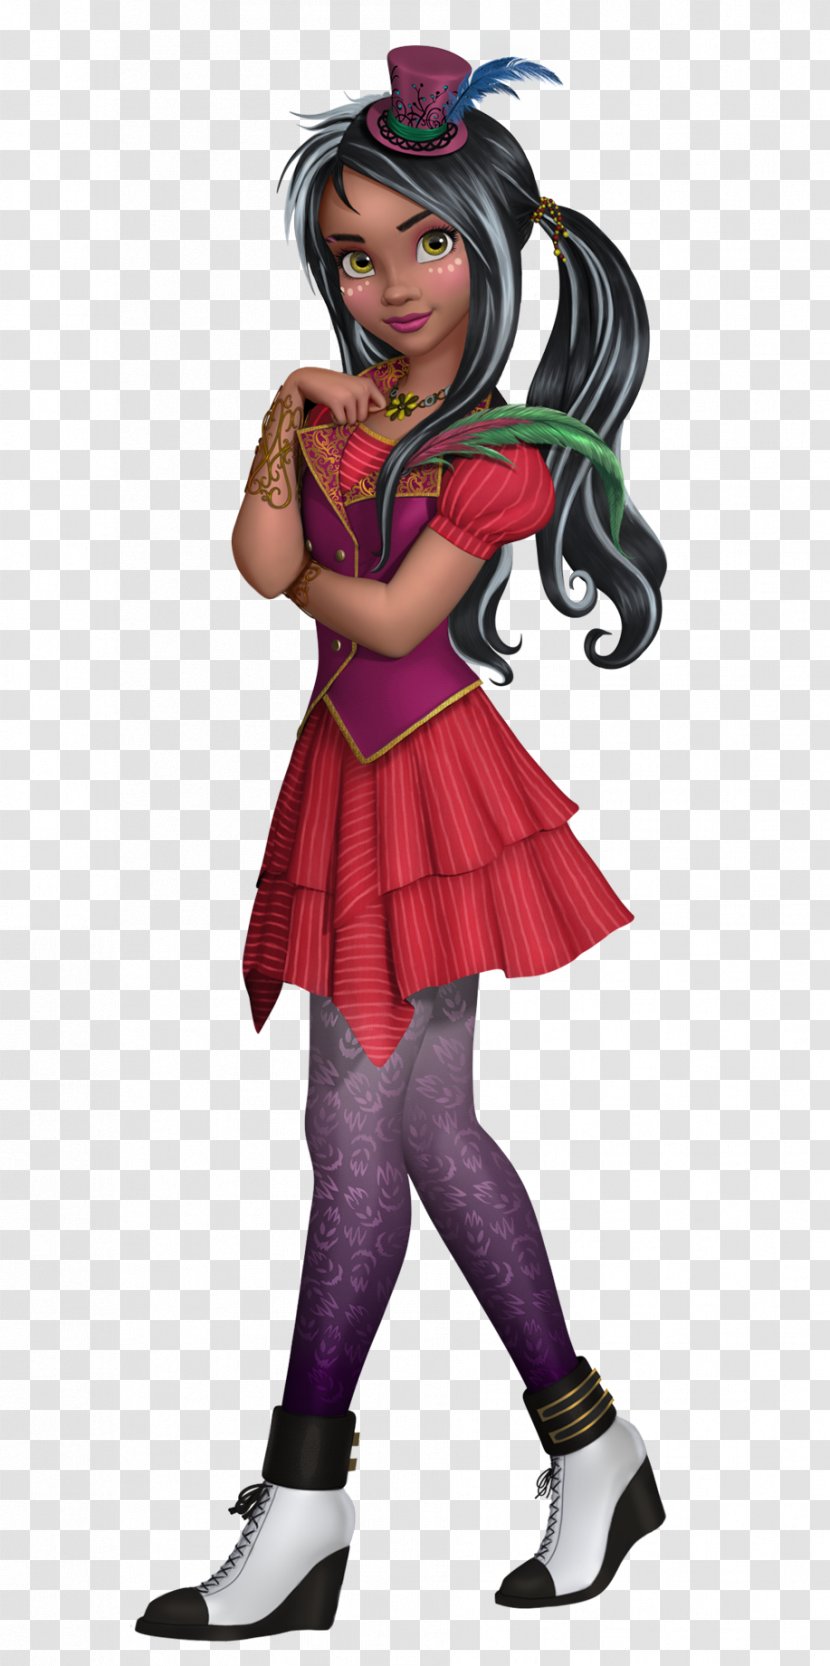 China Anne McClain Dr. Facilier Descendants: Wicked World Genie Carlos - Frame - Daughter Transparent PNG